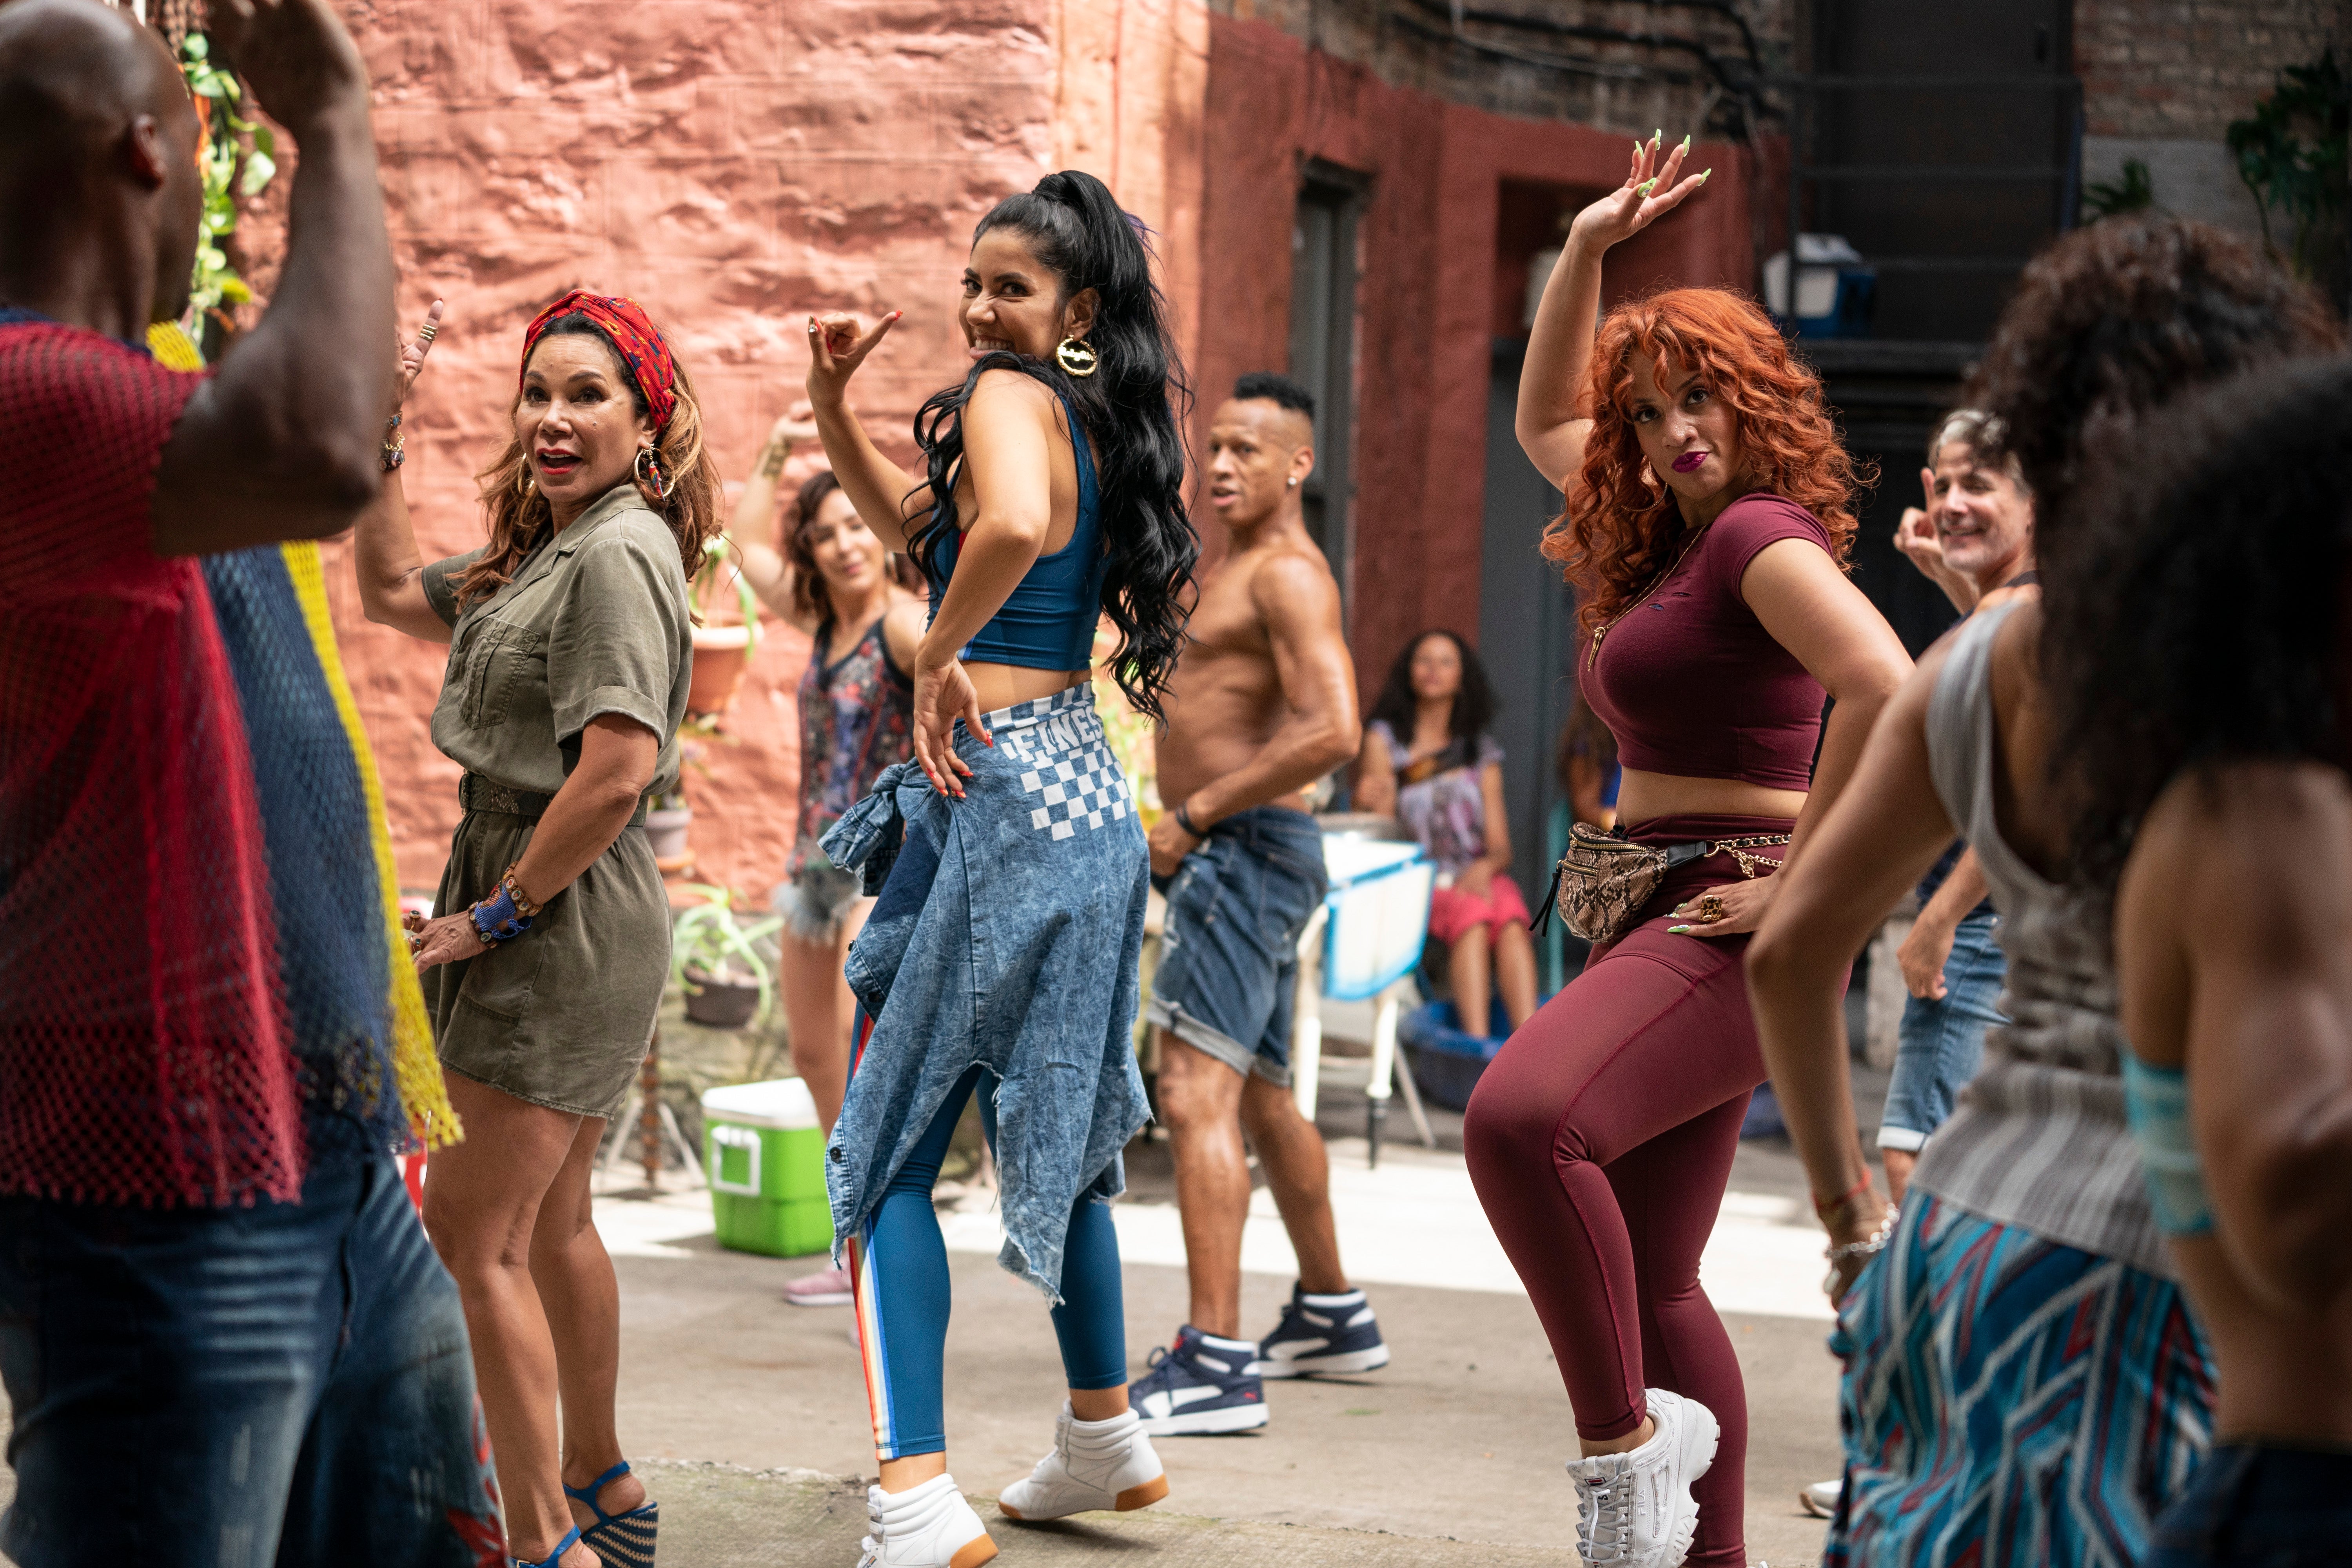 In the Heights' salon ladies dance at the Carnaval del Barrio.